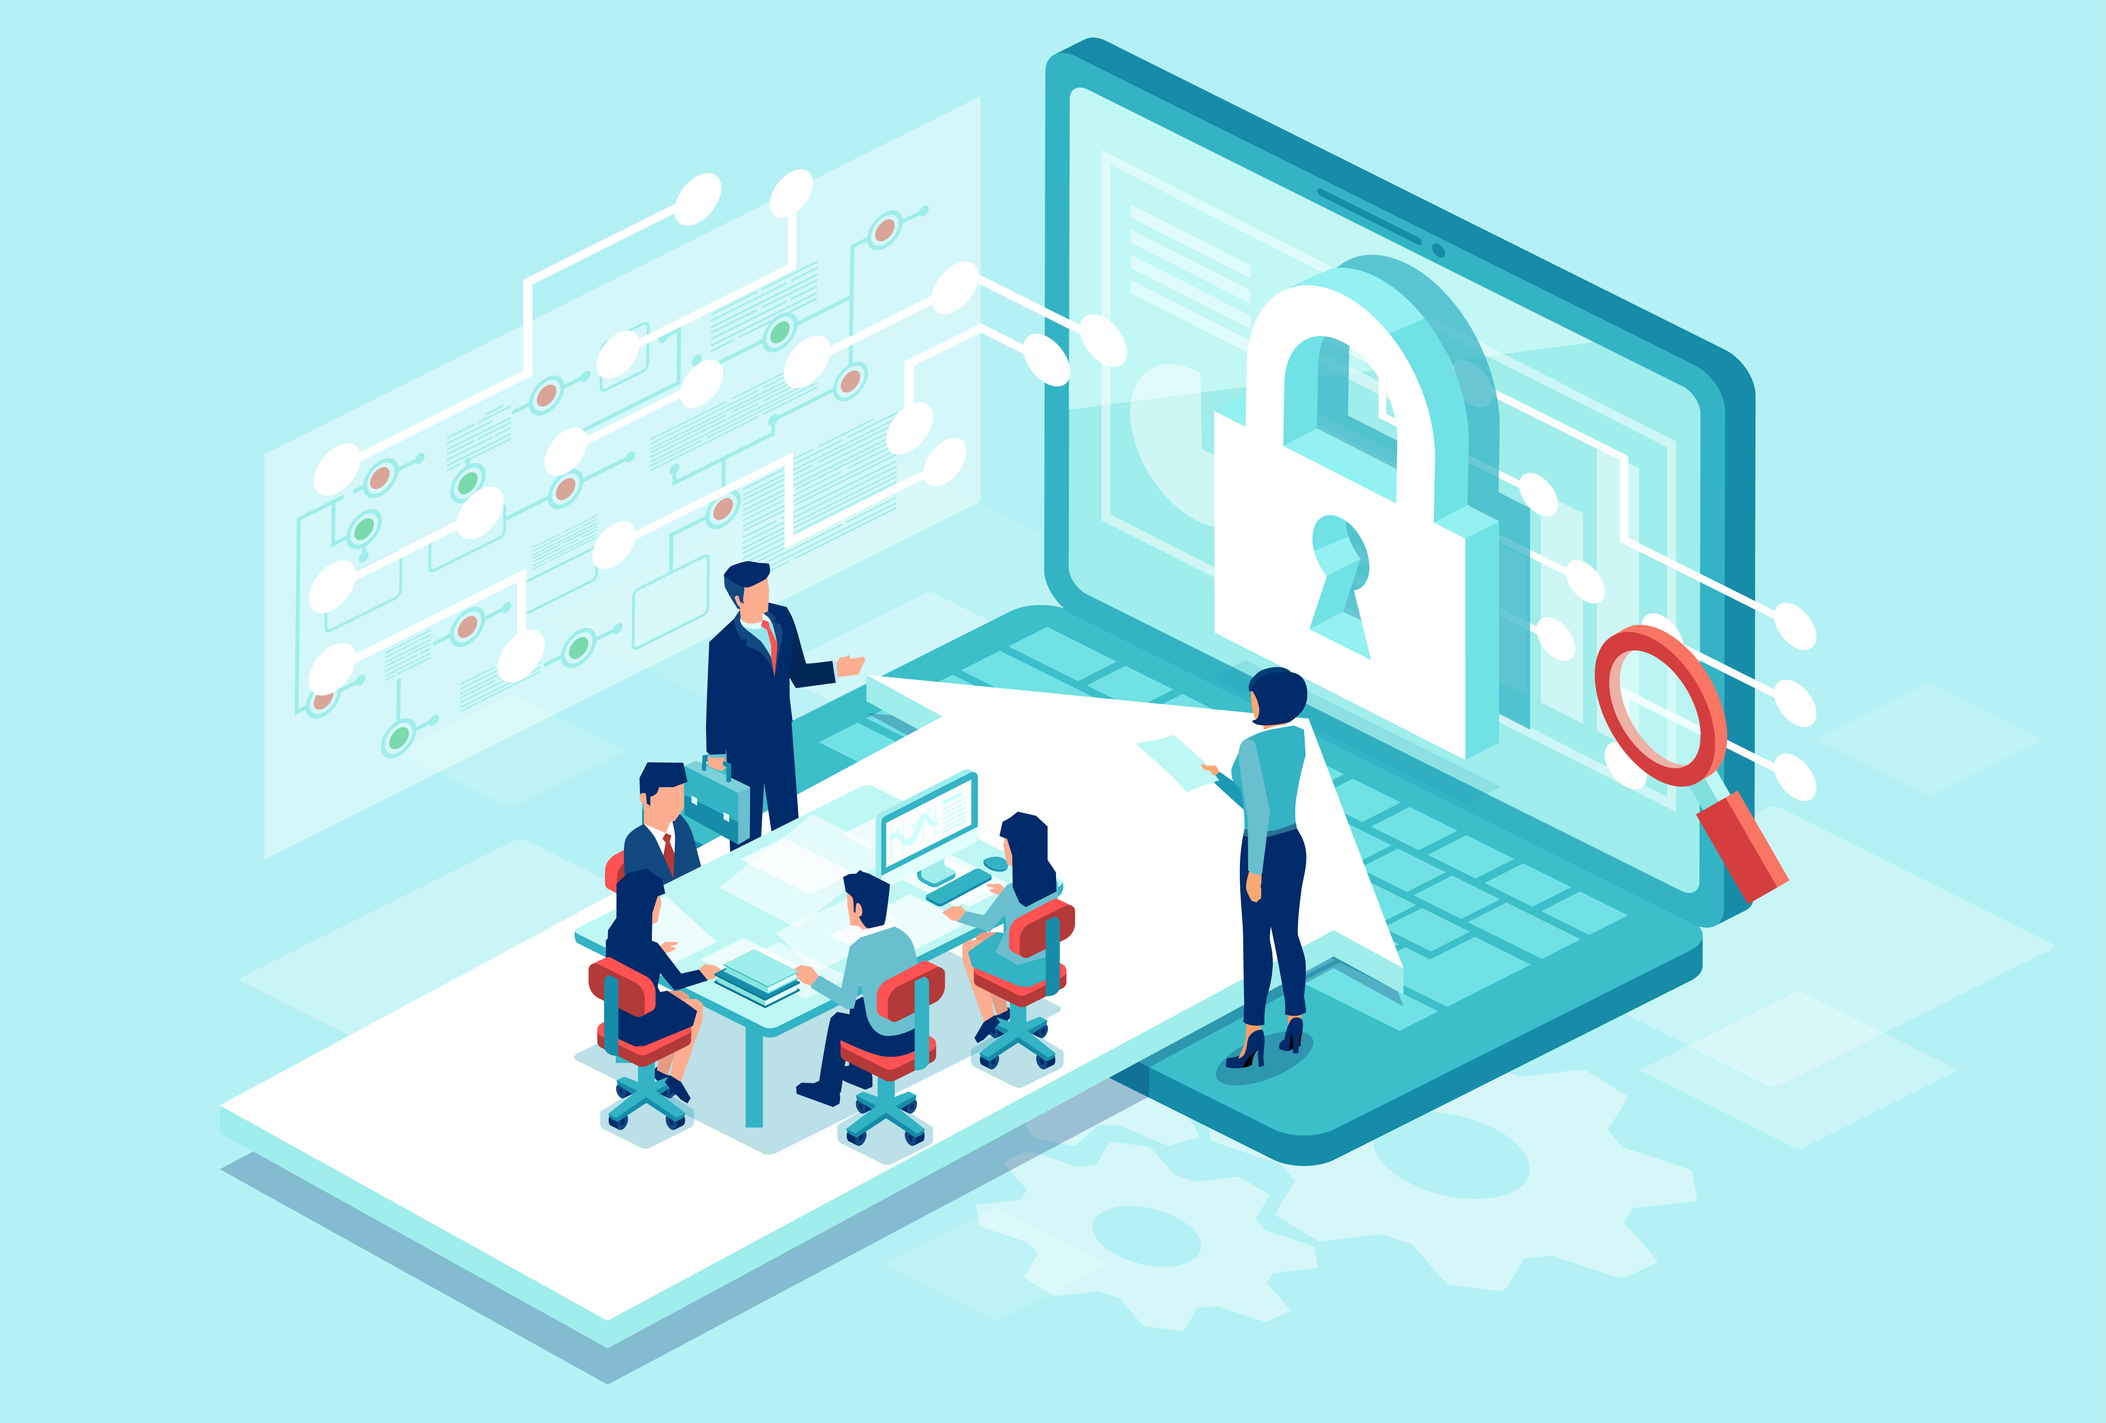 3 Fundamental Cybersecurity Questions to Ask Before Hiring a Vendor